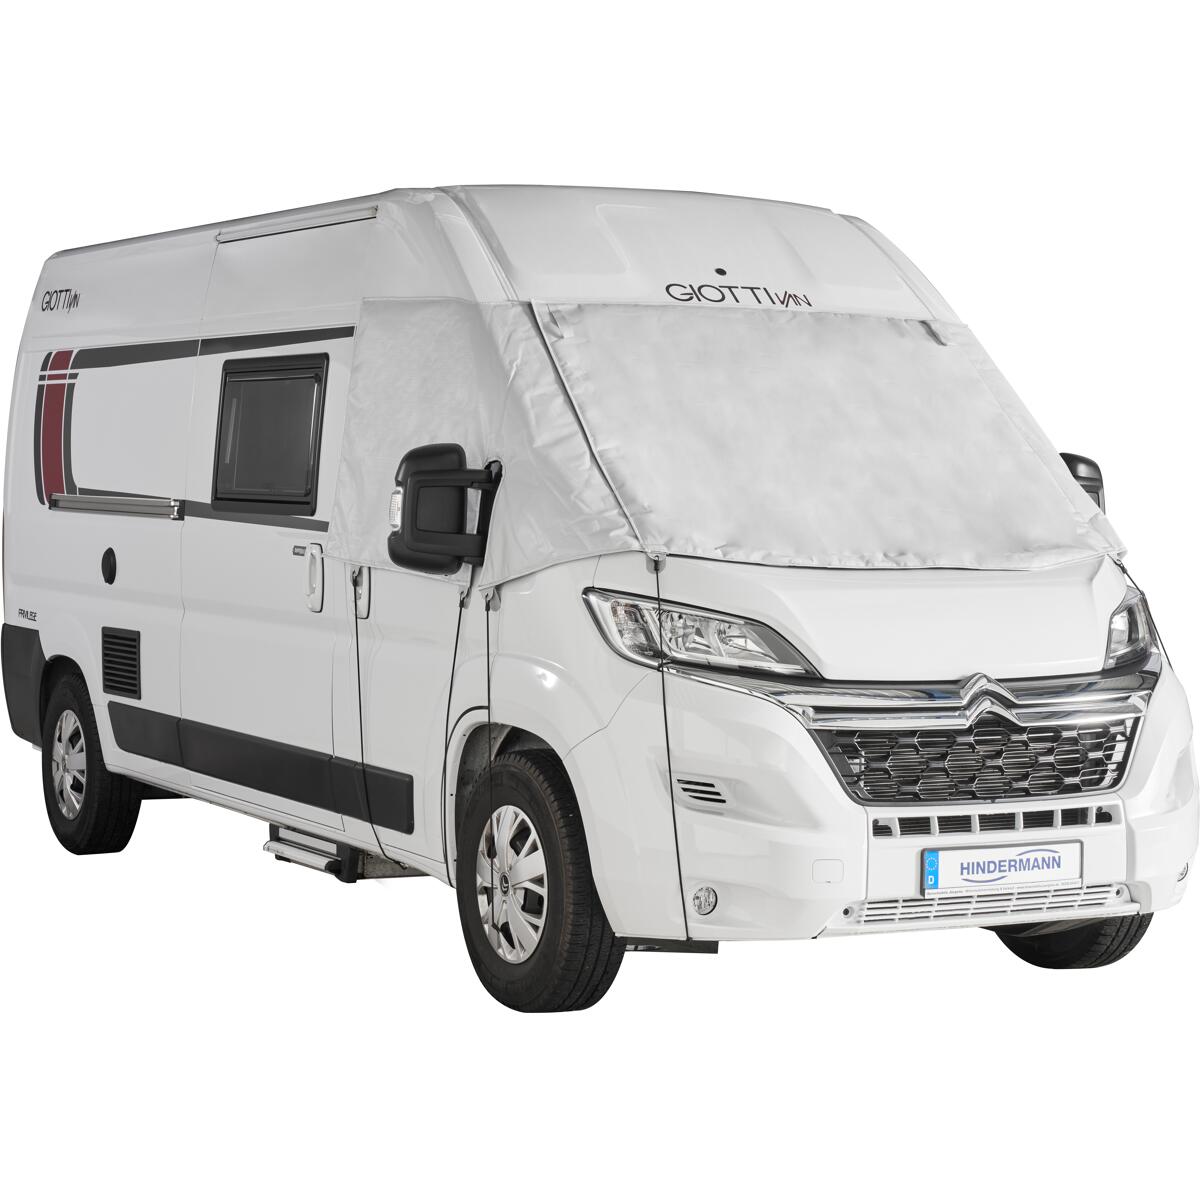 Hindermann LUX Thermomatte für Fiat Ducato Typ 250/290 ab Bj. 2007 bei  Camping Wagner Campingzubehör